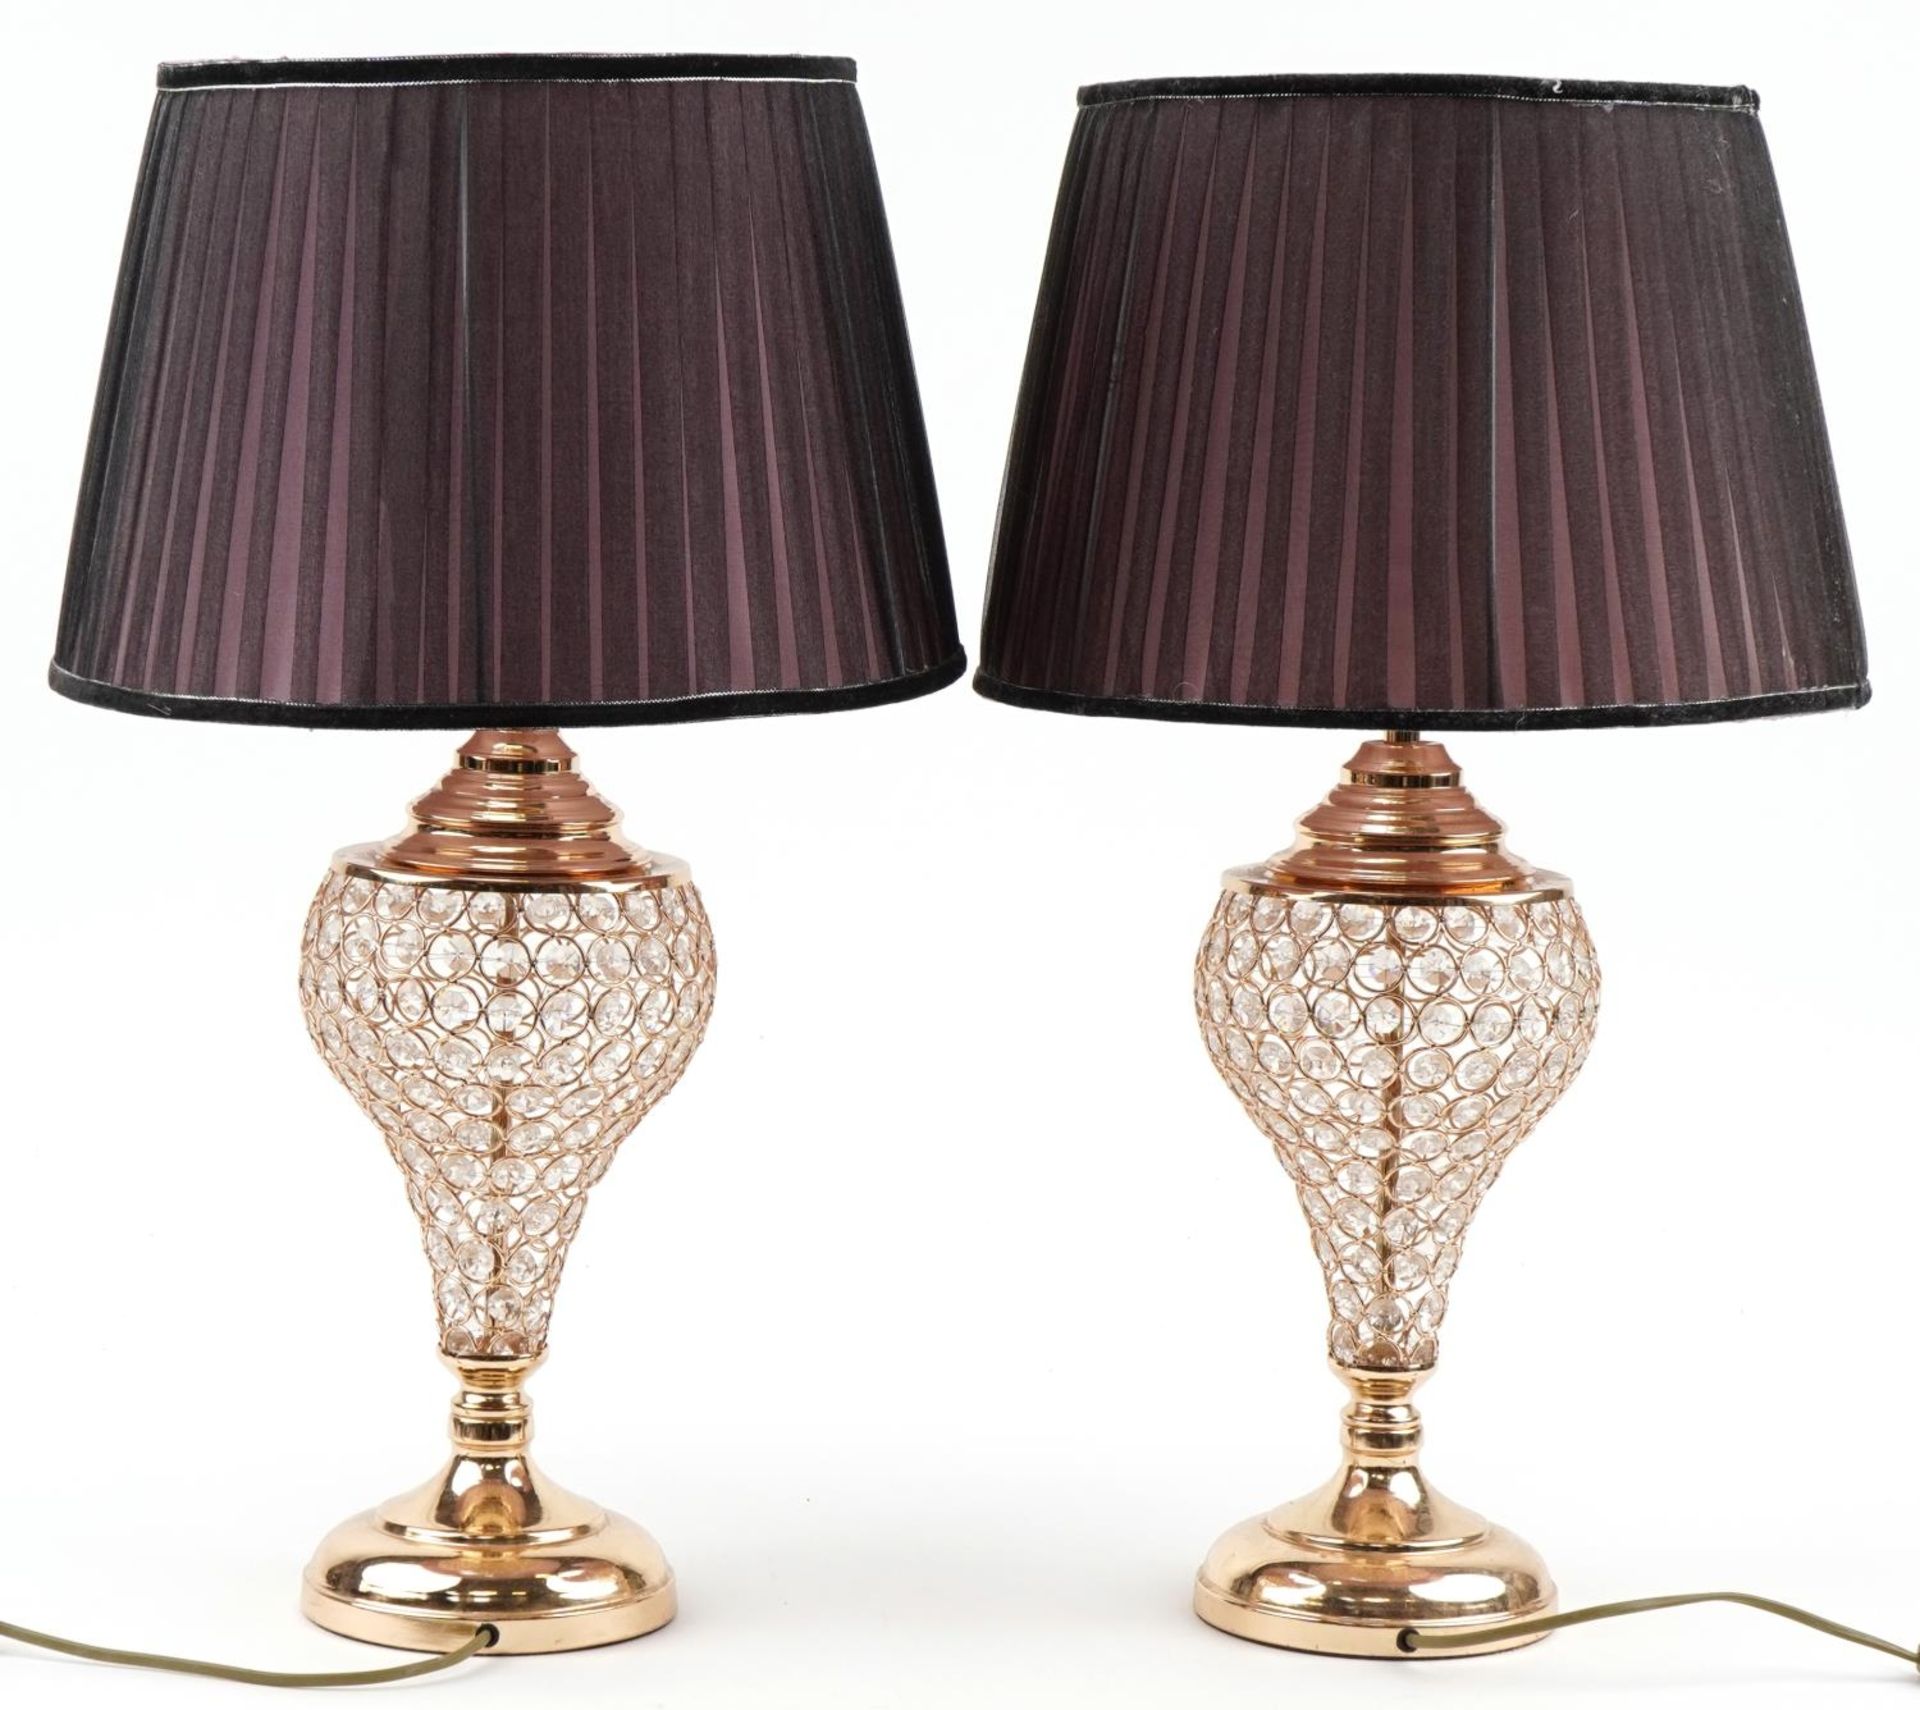 Pair of contemporary coppered table lamps with beads and silk lined shades, 48cm high including - Image 2 of 3